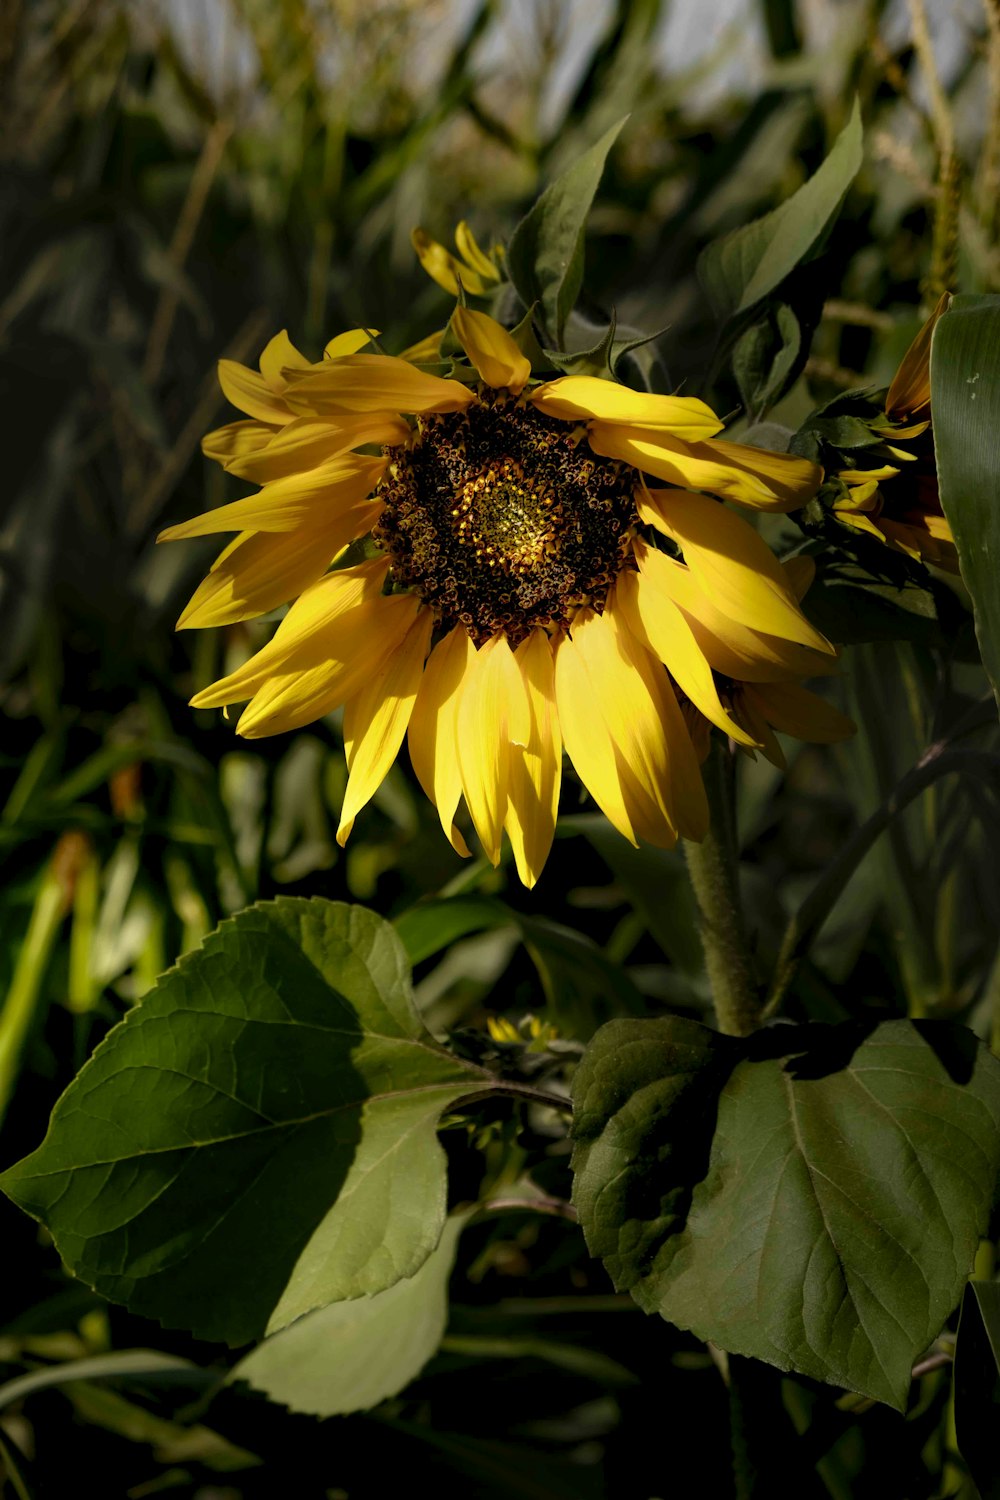 a sunflower in a field of green leaves